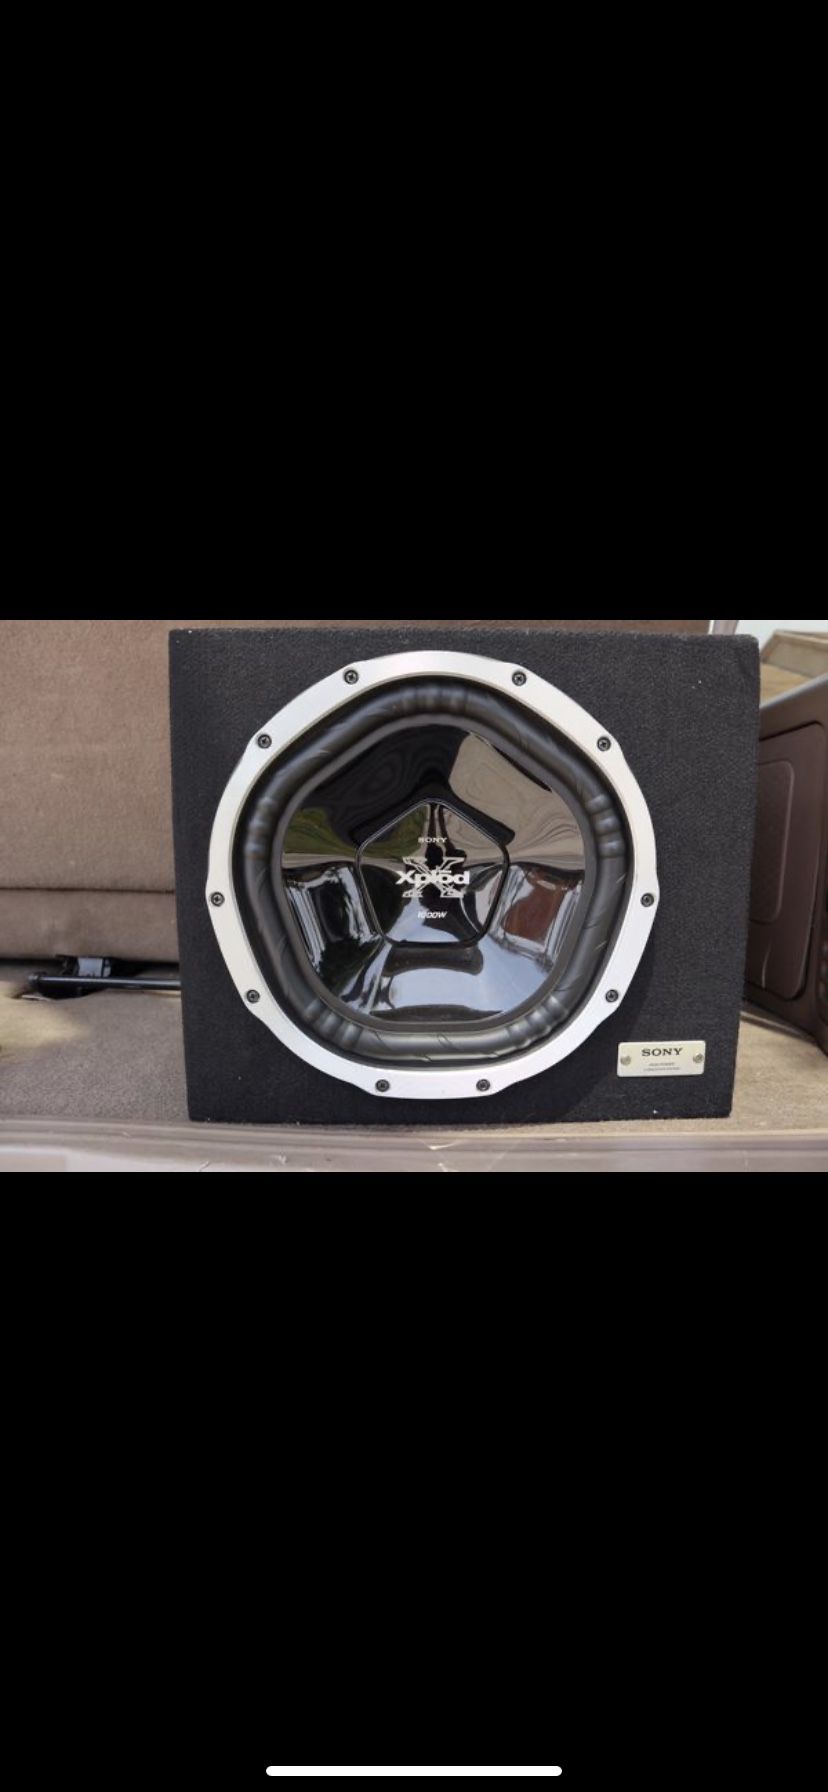 Sony XS Car subwoofer